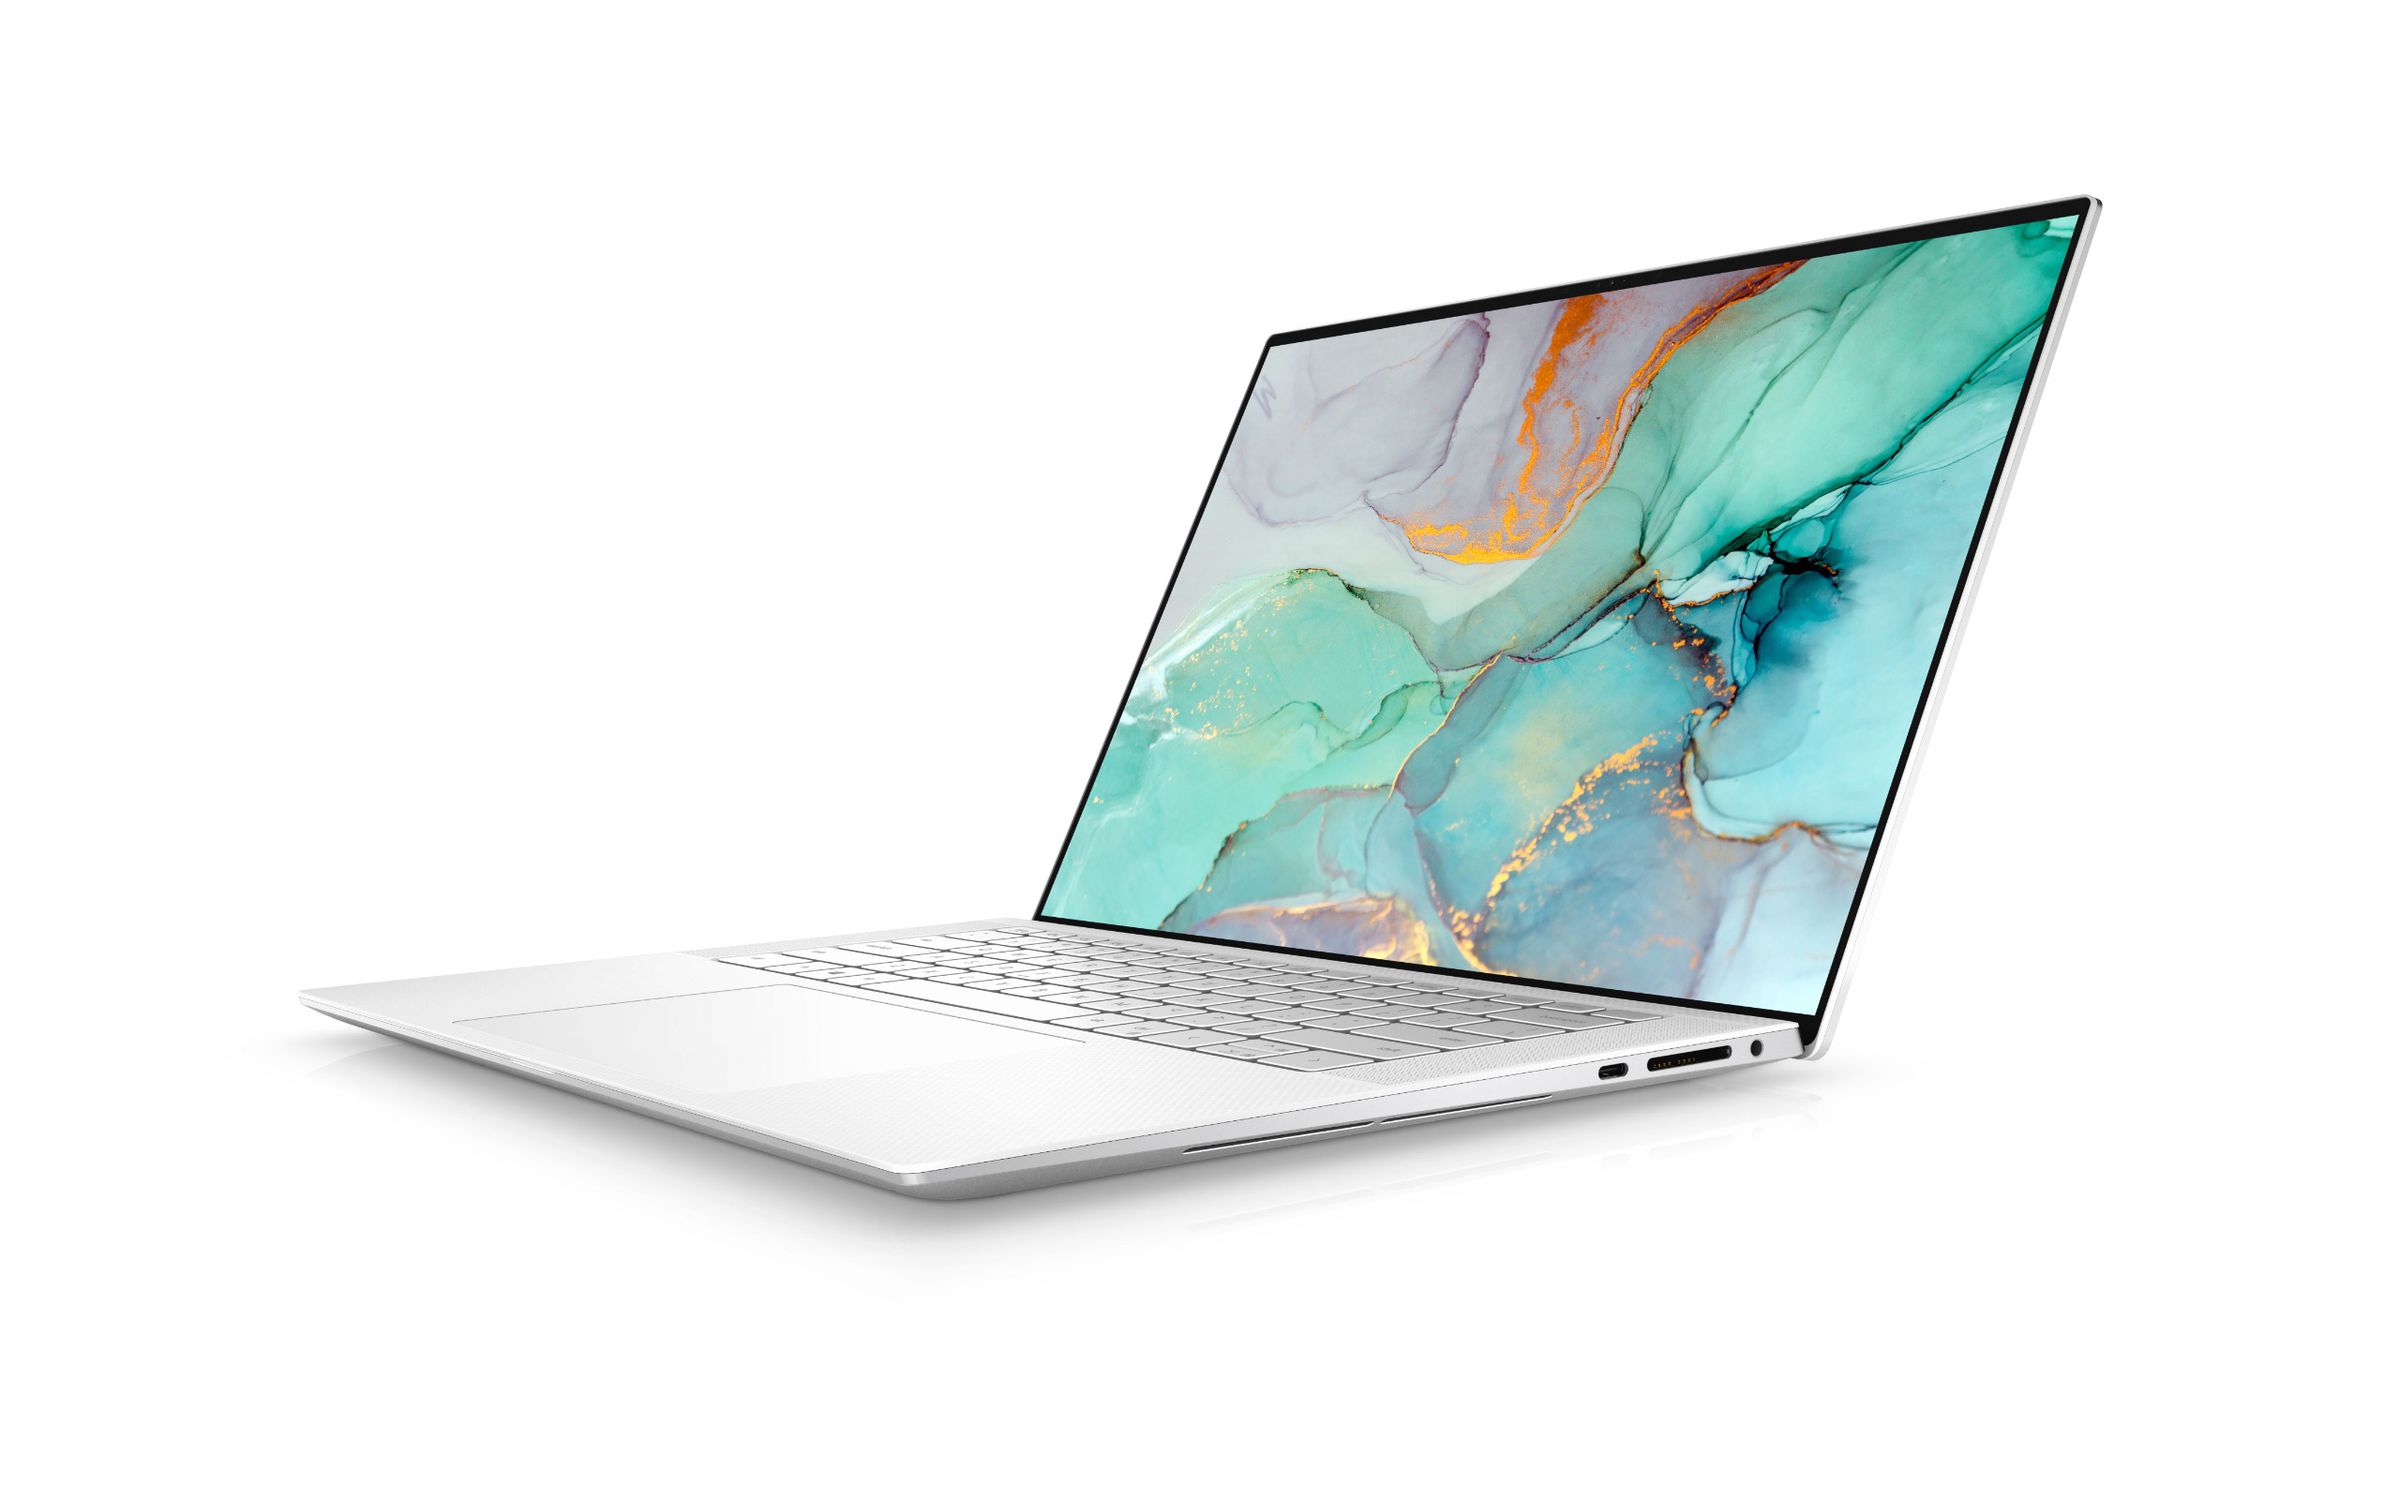 Dell’s 2021 XPS 15